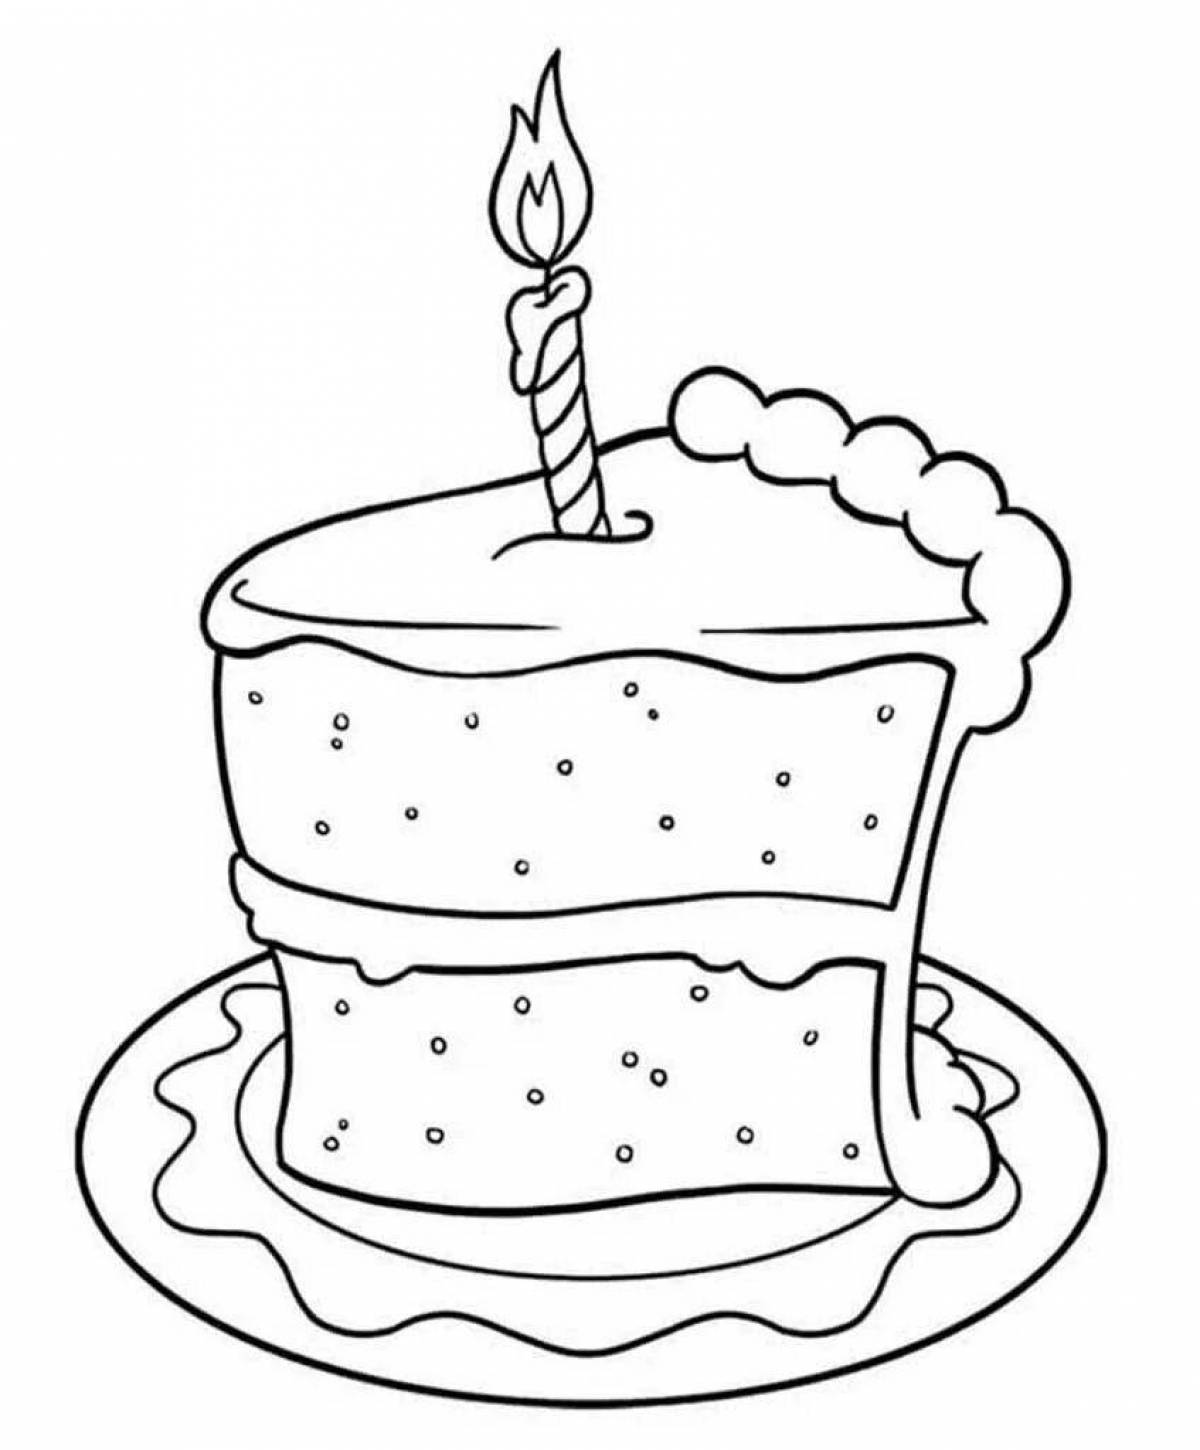 Nutritious chocolate cake coloring page